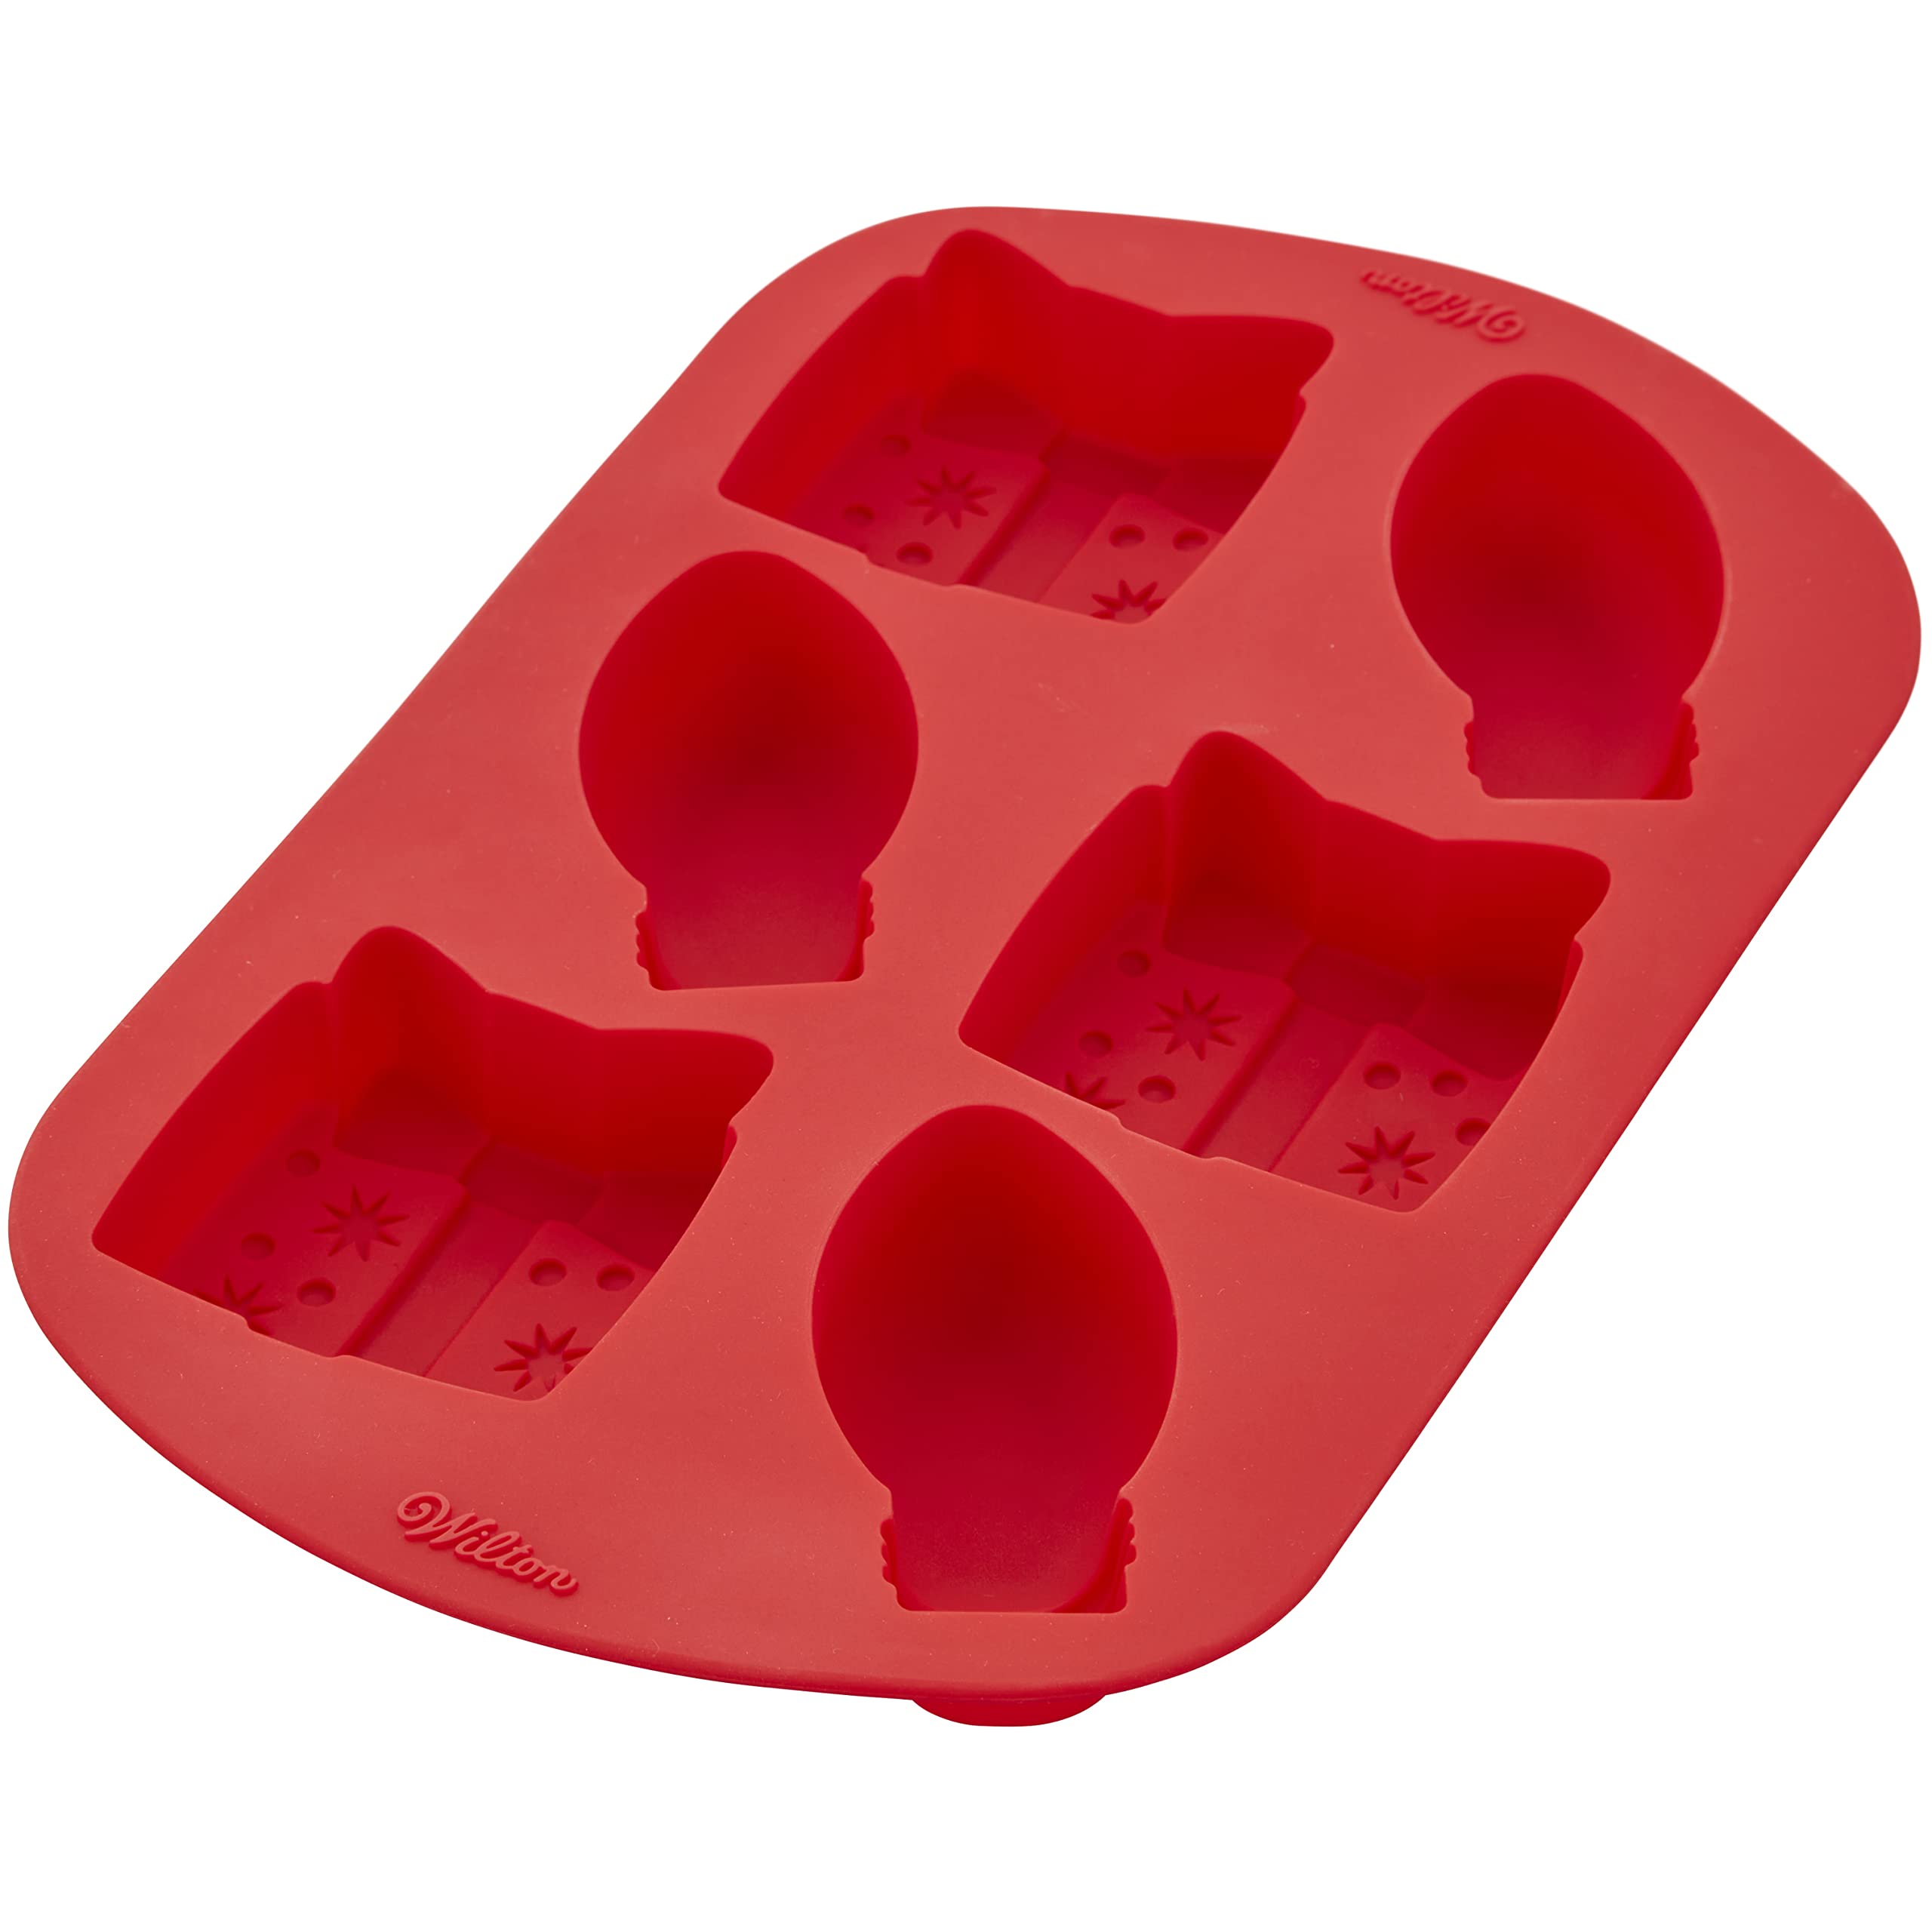 Wilton Christmas Present and Lightbulb Silicone Baking and Candy Mold, 6-Cavity